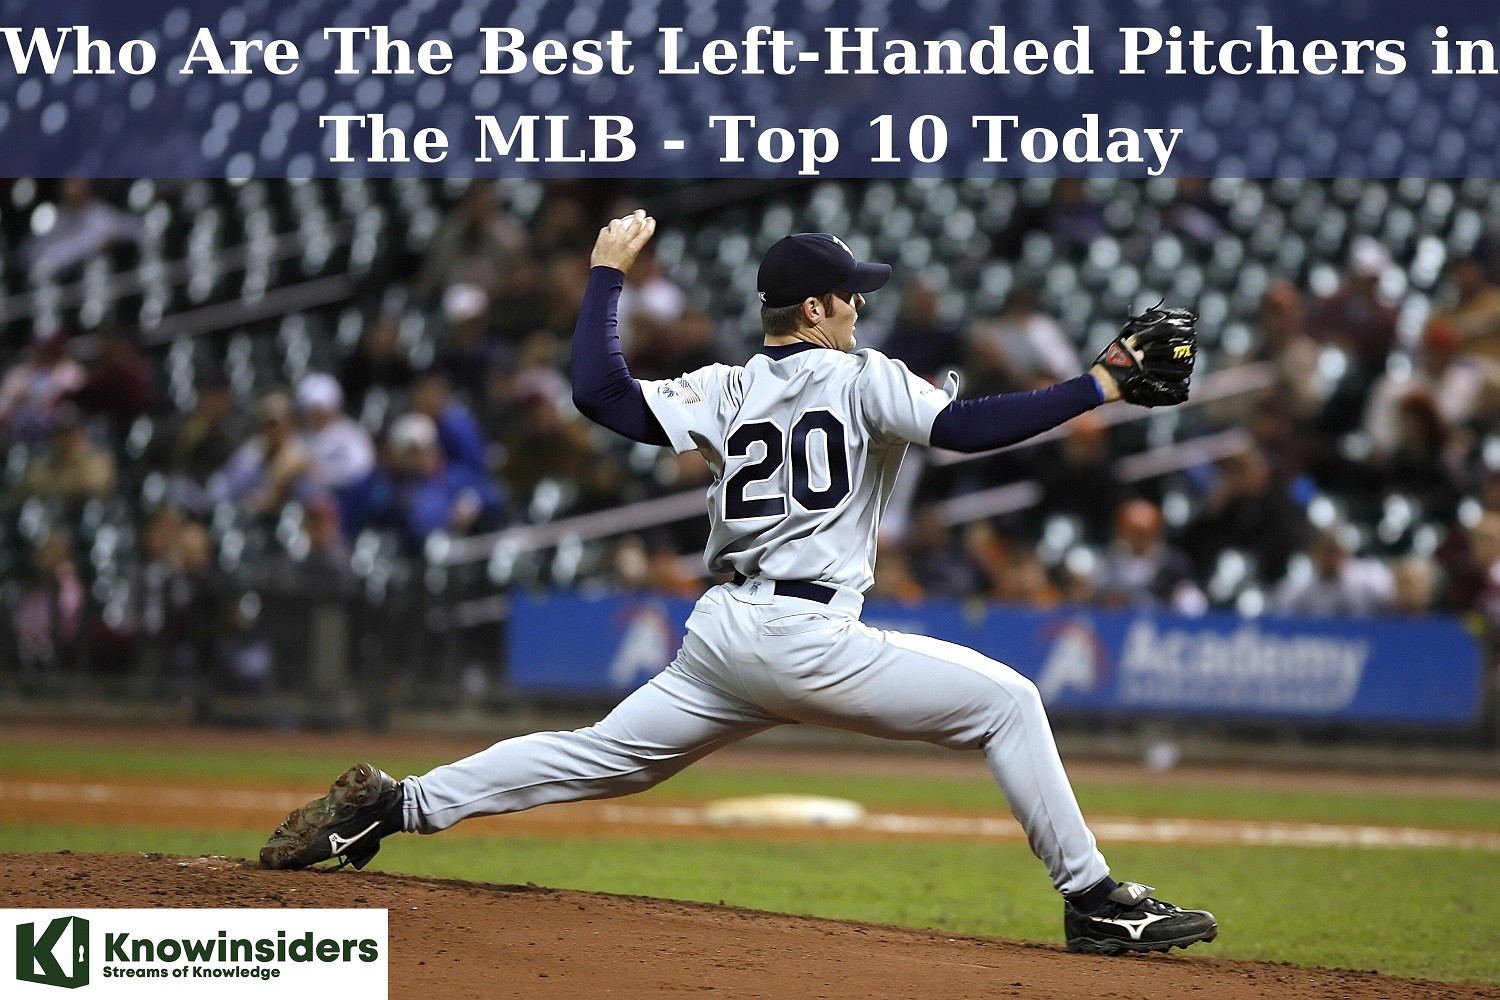 Top 10 Best Left-Handed Pitchers in The MLB Today